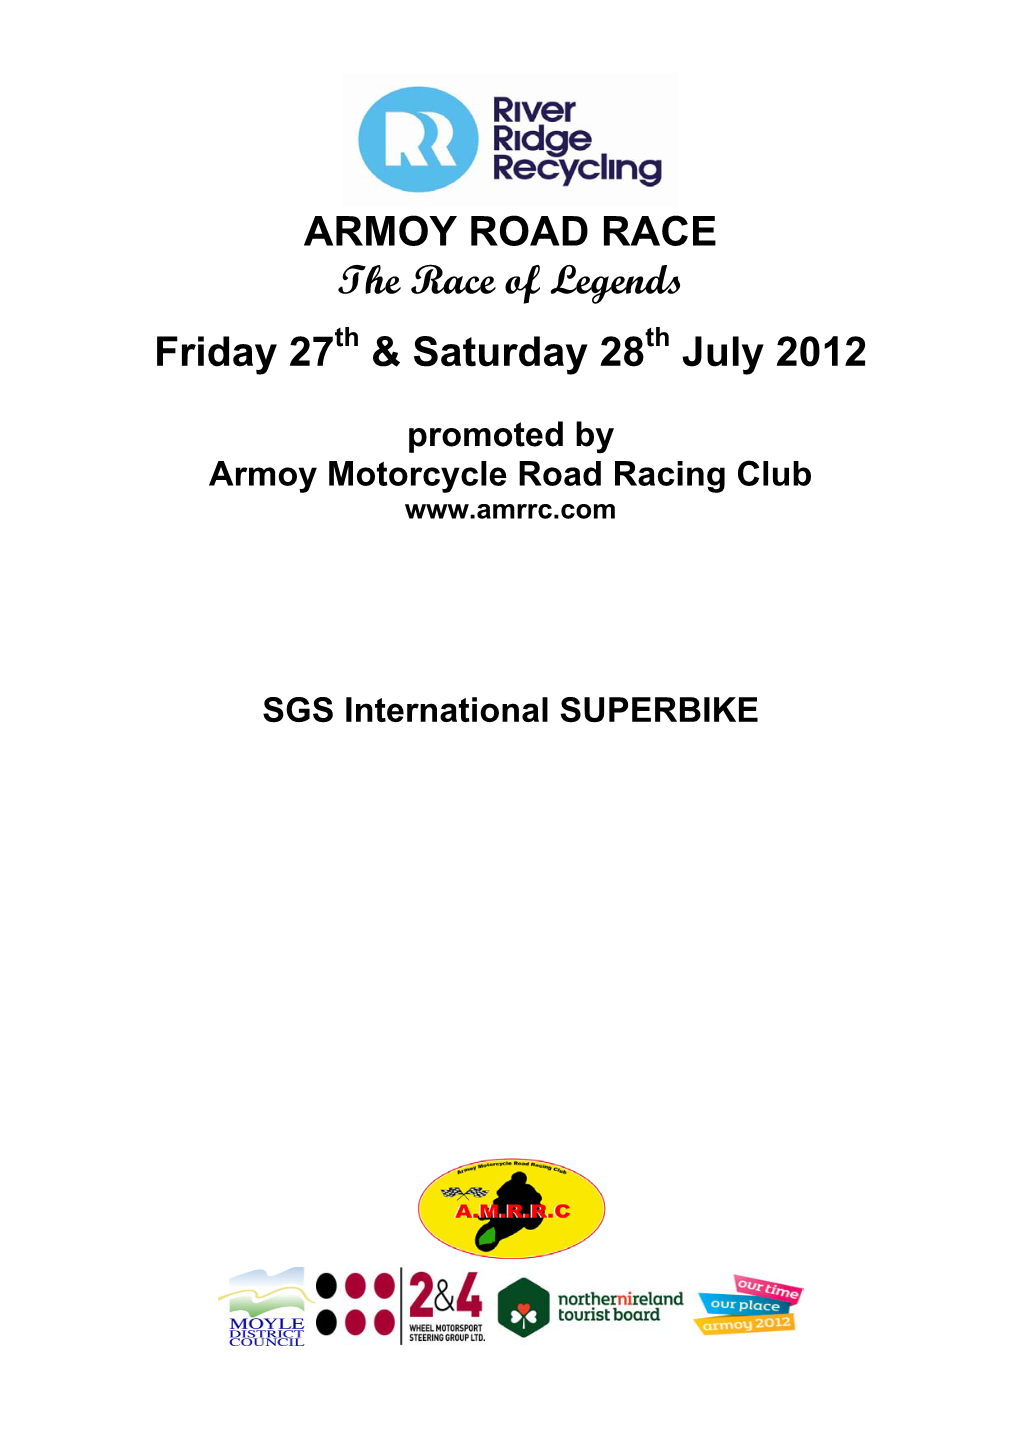 ARMOY ROAD RACE the Race of Legends Friday 27 & Saturday 28